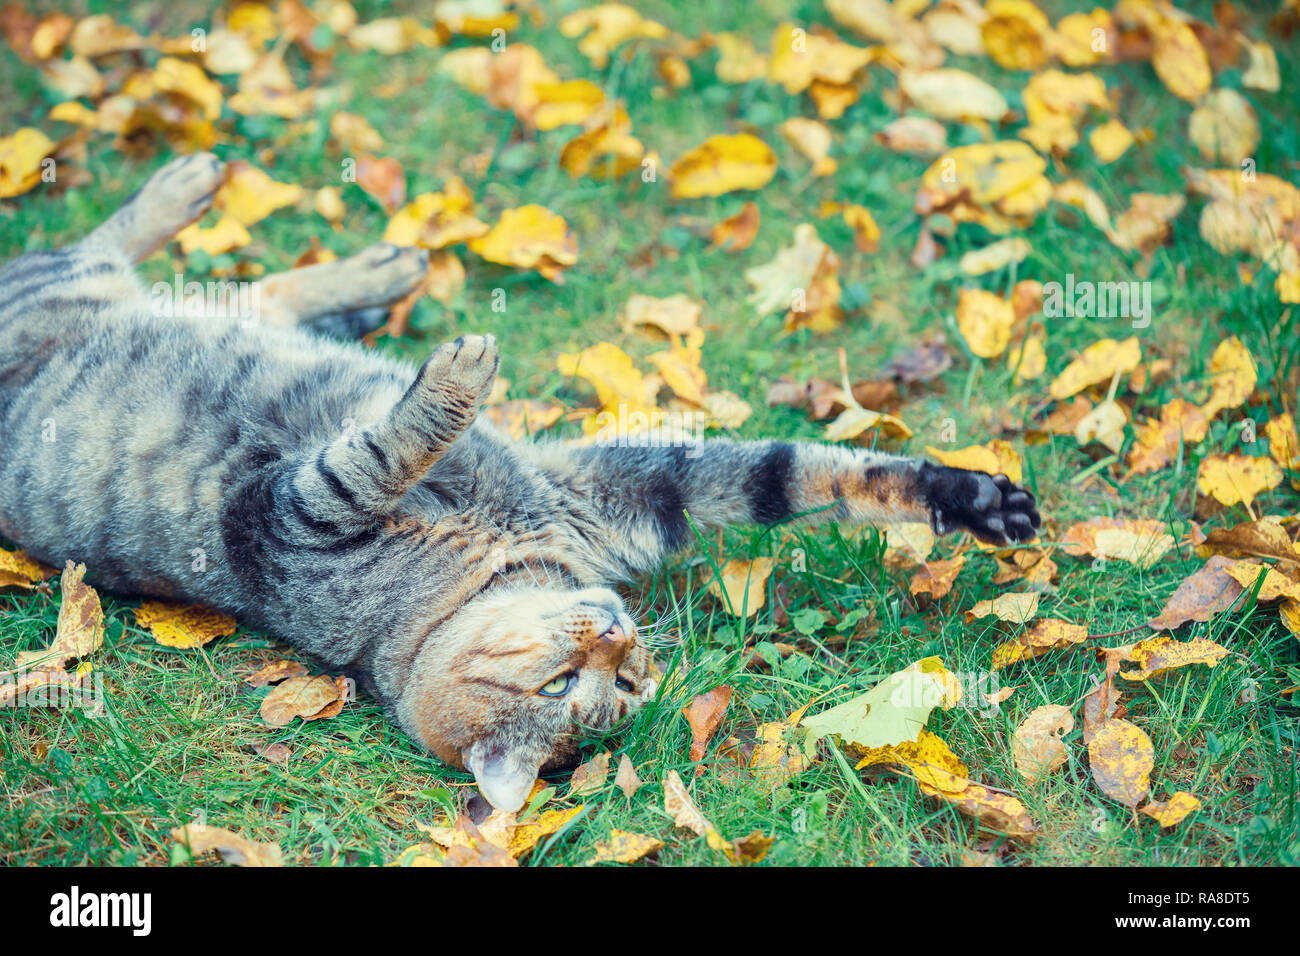 The cat lies on his back on the grass, covered with fallen leaves in the autumn garden Stock Photo